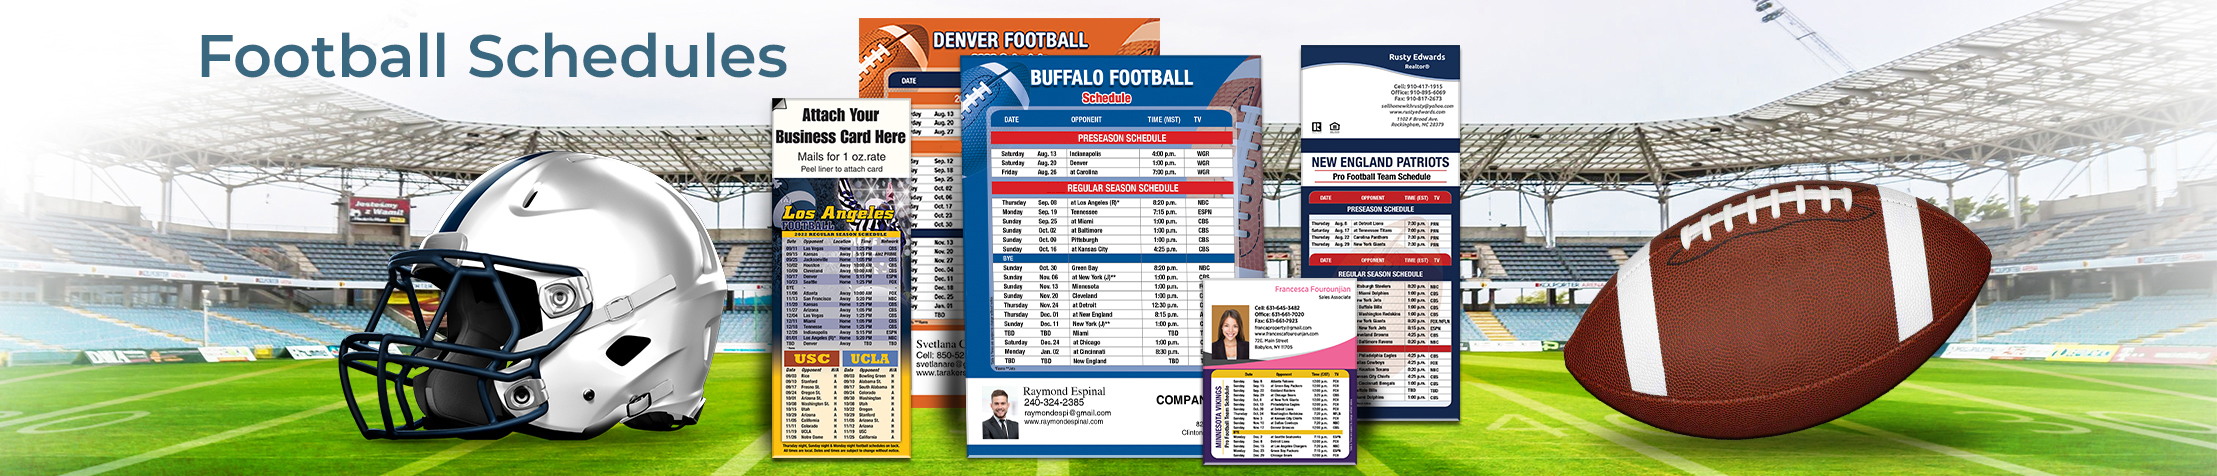 Assist2Sell Real Estate Football Schedules - A2S  personalized football schedules | BestPrintBuy.com